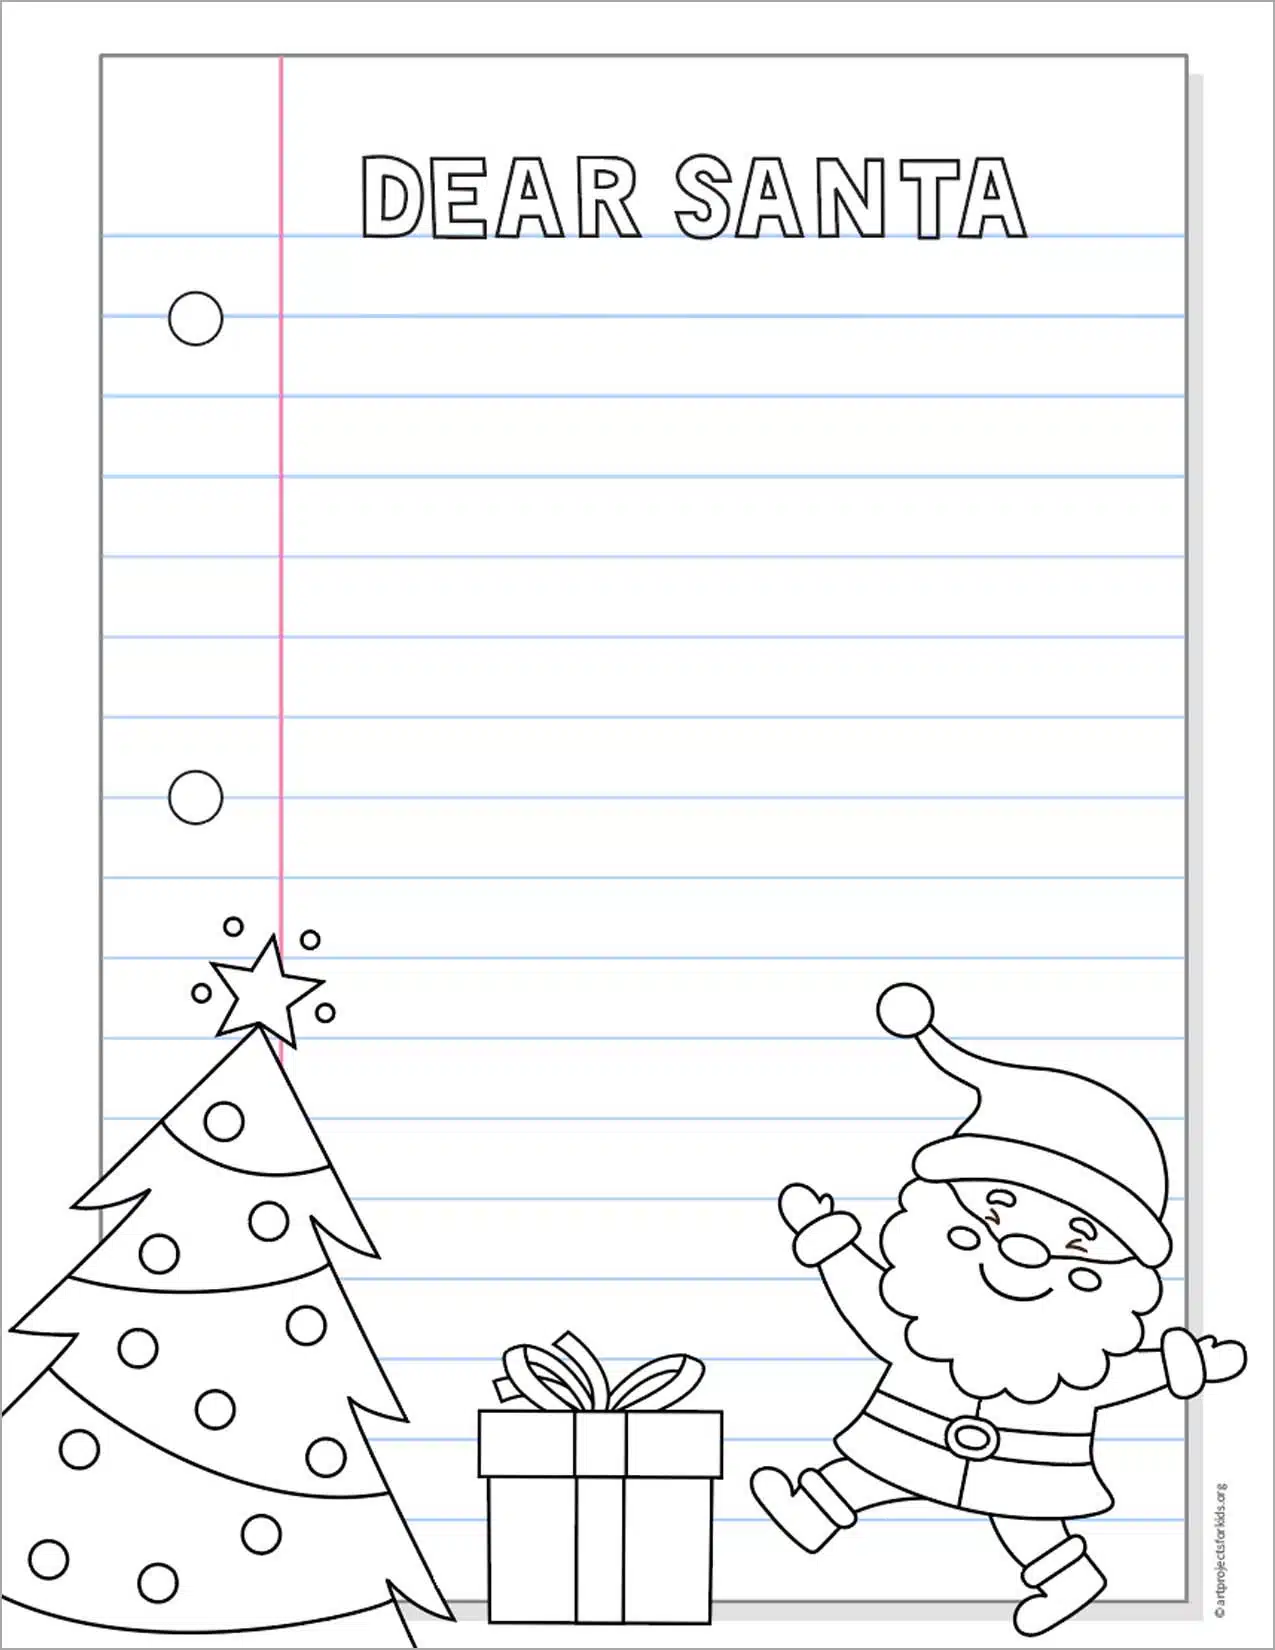 Coloring letter to santa template printable